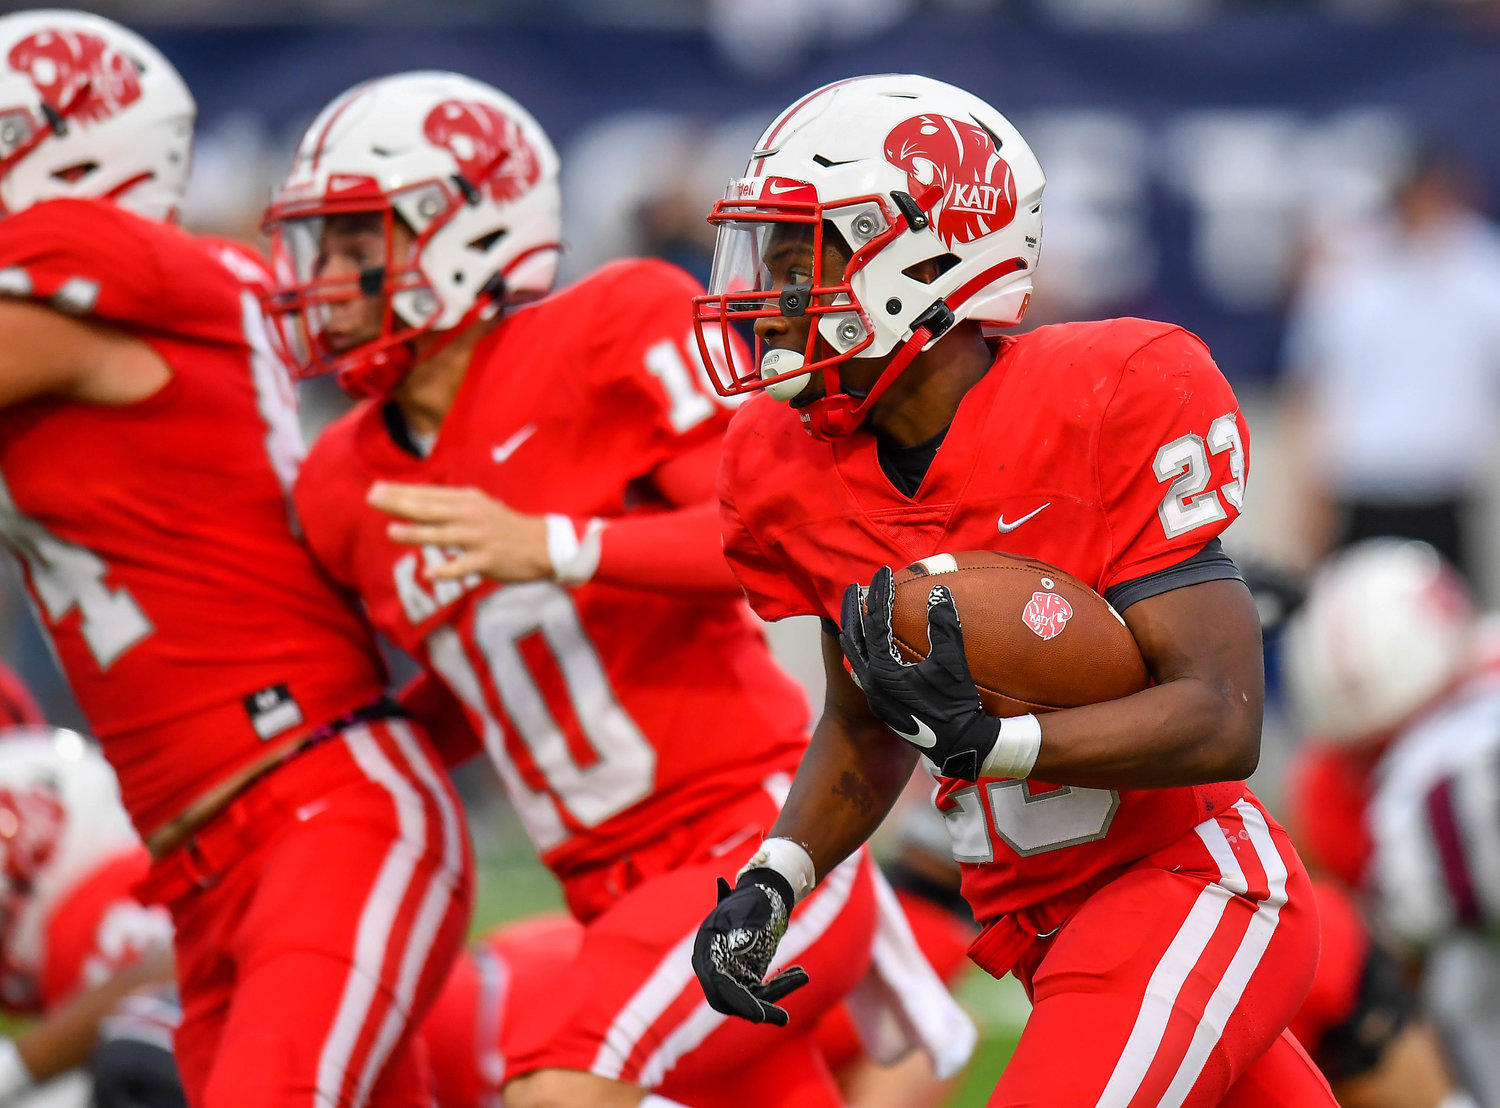 Katy, Tx. Oct 1, 2021: Katy's #23 Seth Davis carries the ball from mid field scoring a TD during a game between Katy Tigers and Tompkins Falcons at Legacy Stadium in Katy. (Photo by Mark Goodman / Katy Times)